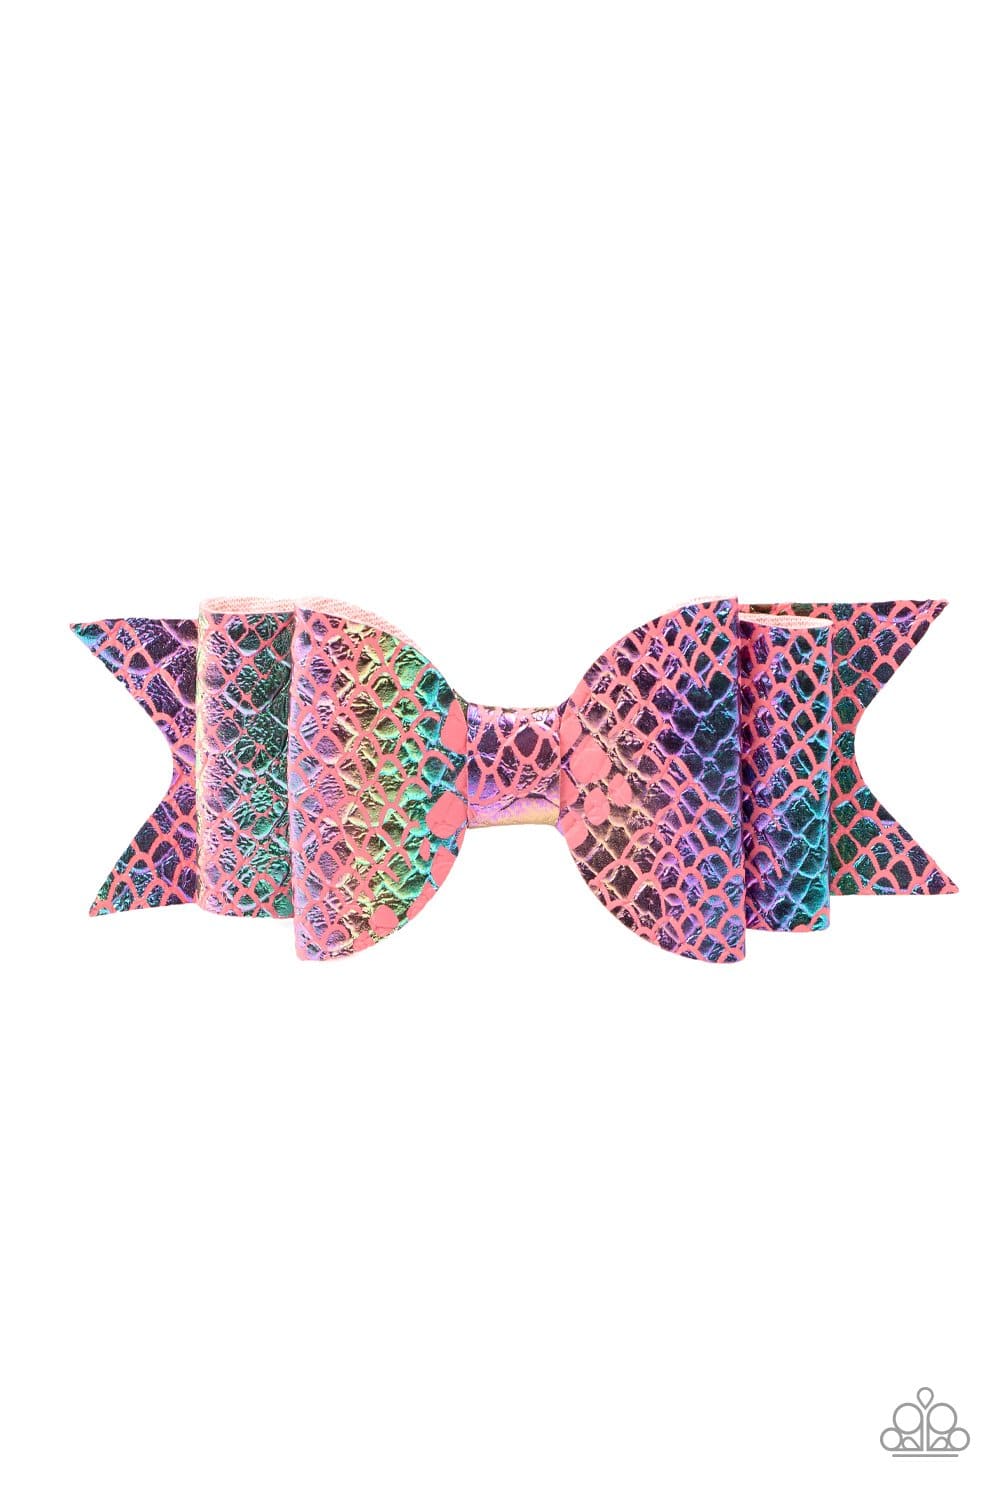 Paparazzi: BOW Your Mind - Pink Rainbow Hair Clip - Jewels N’ Thingz Boutique